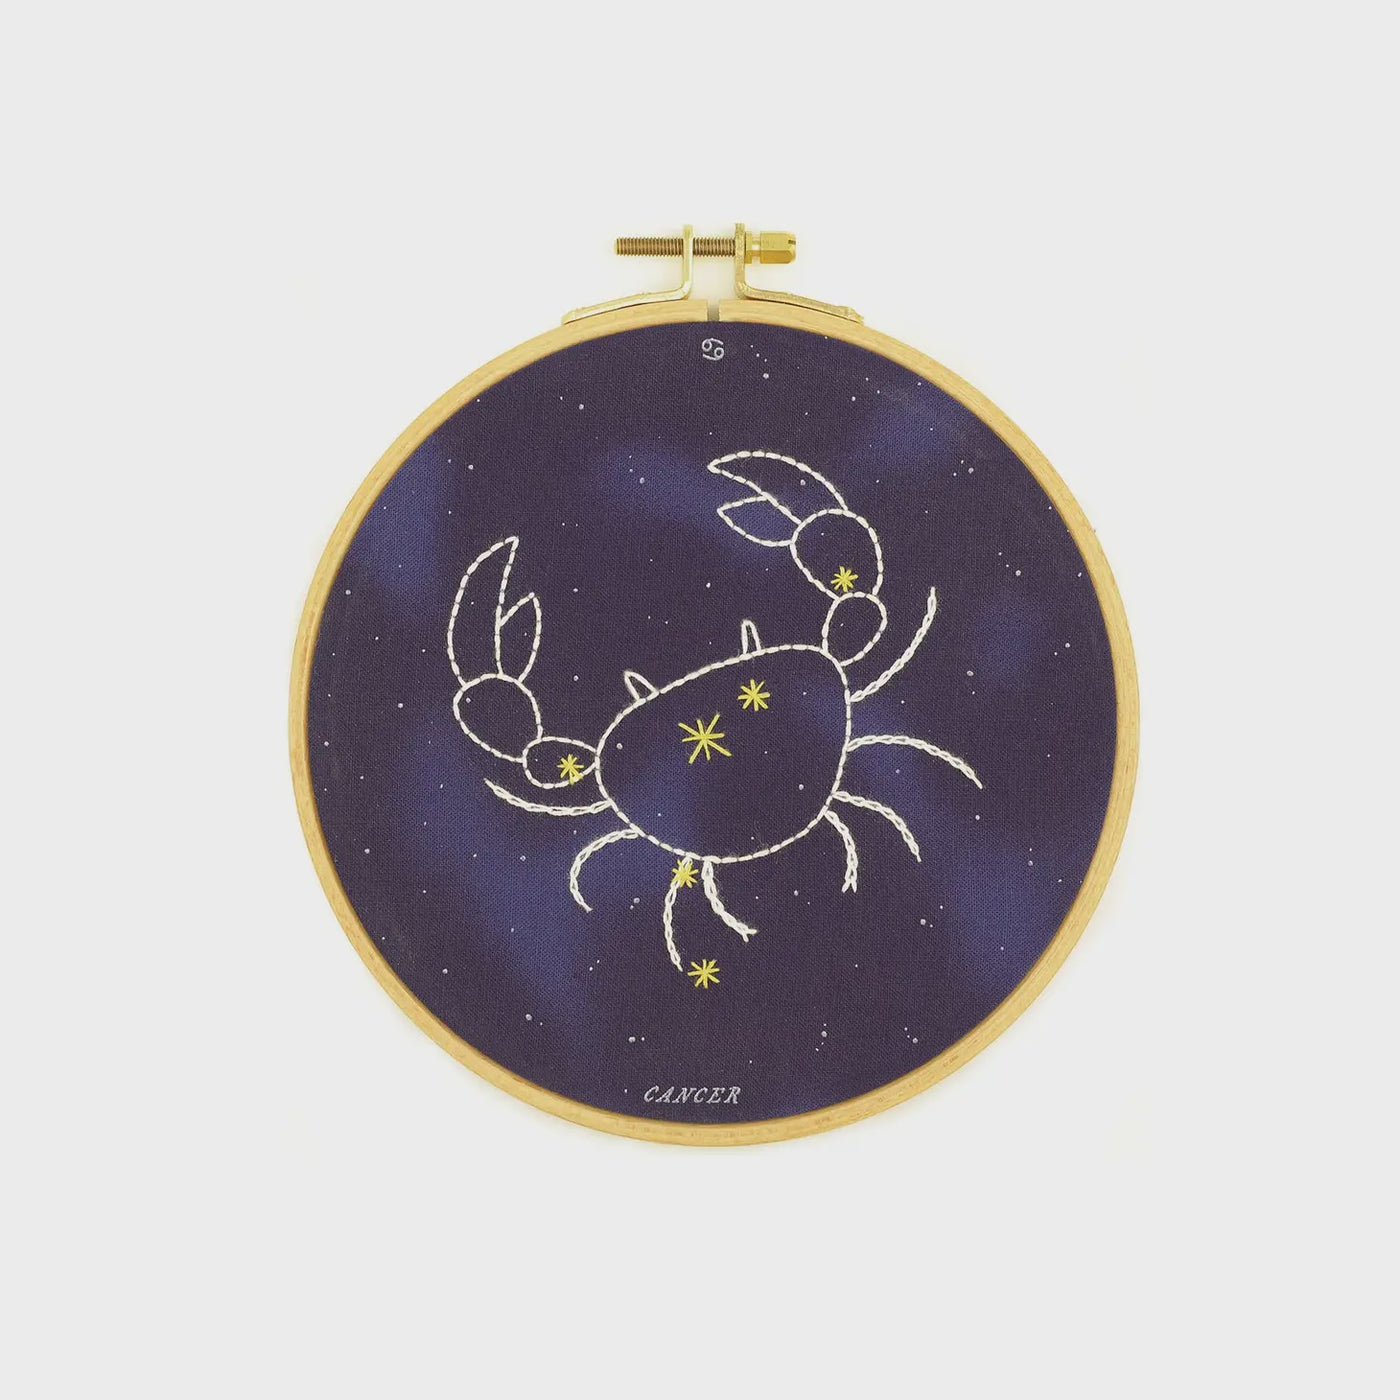 Cancer Embroidery Kit (6" hoop)